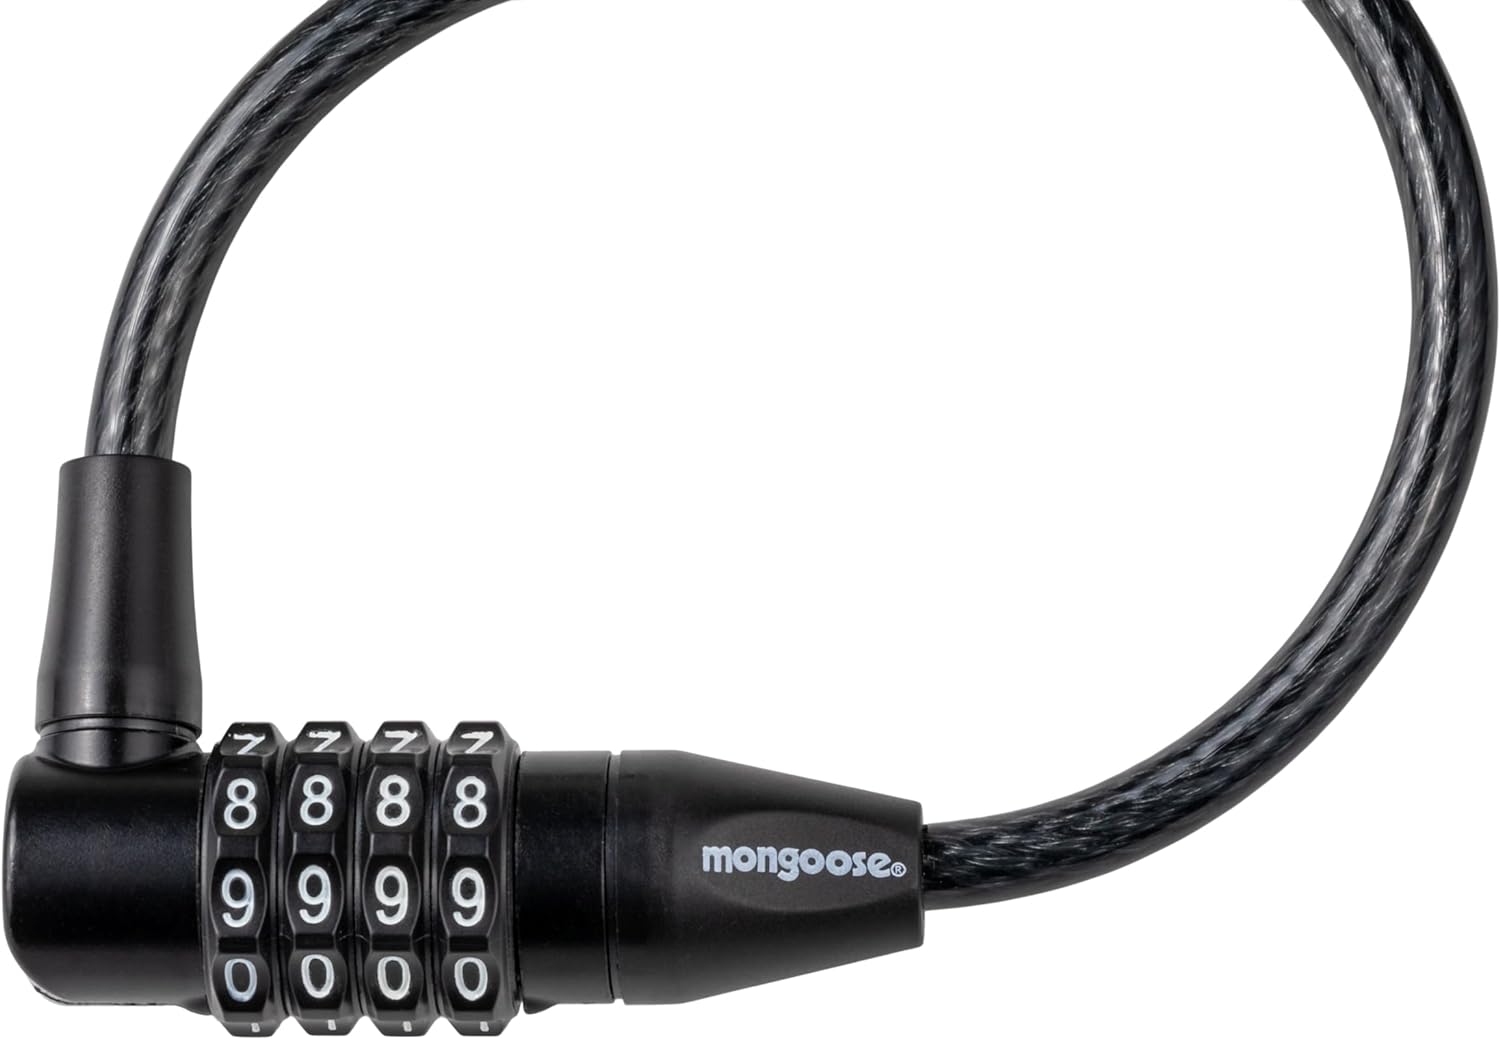 Mongoose Cable Combo Bicycle Lock (5-Feet),Black